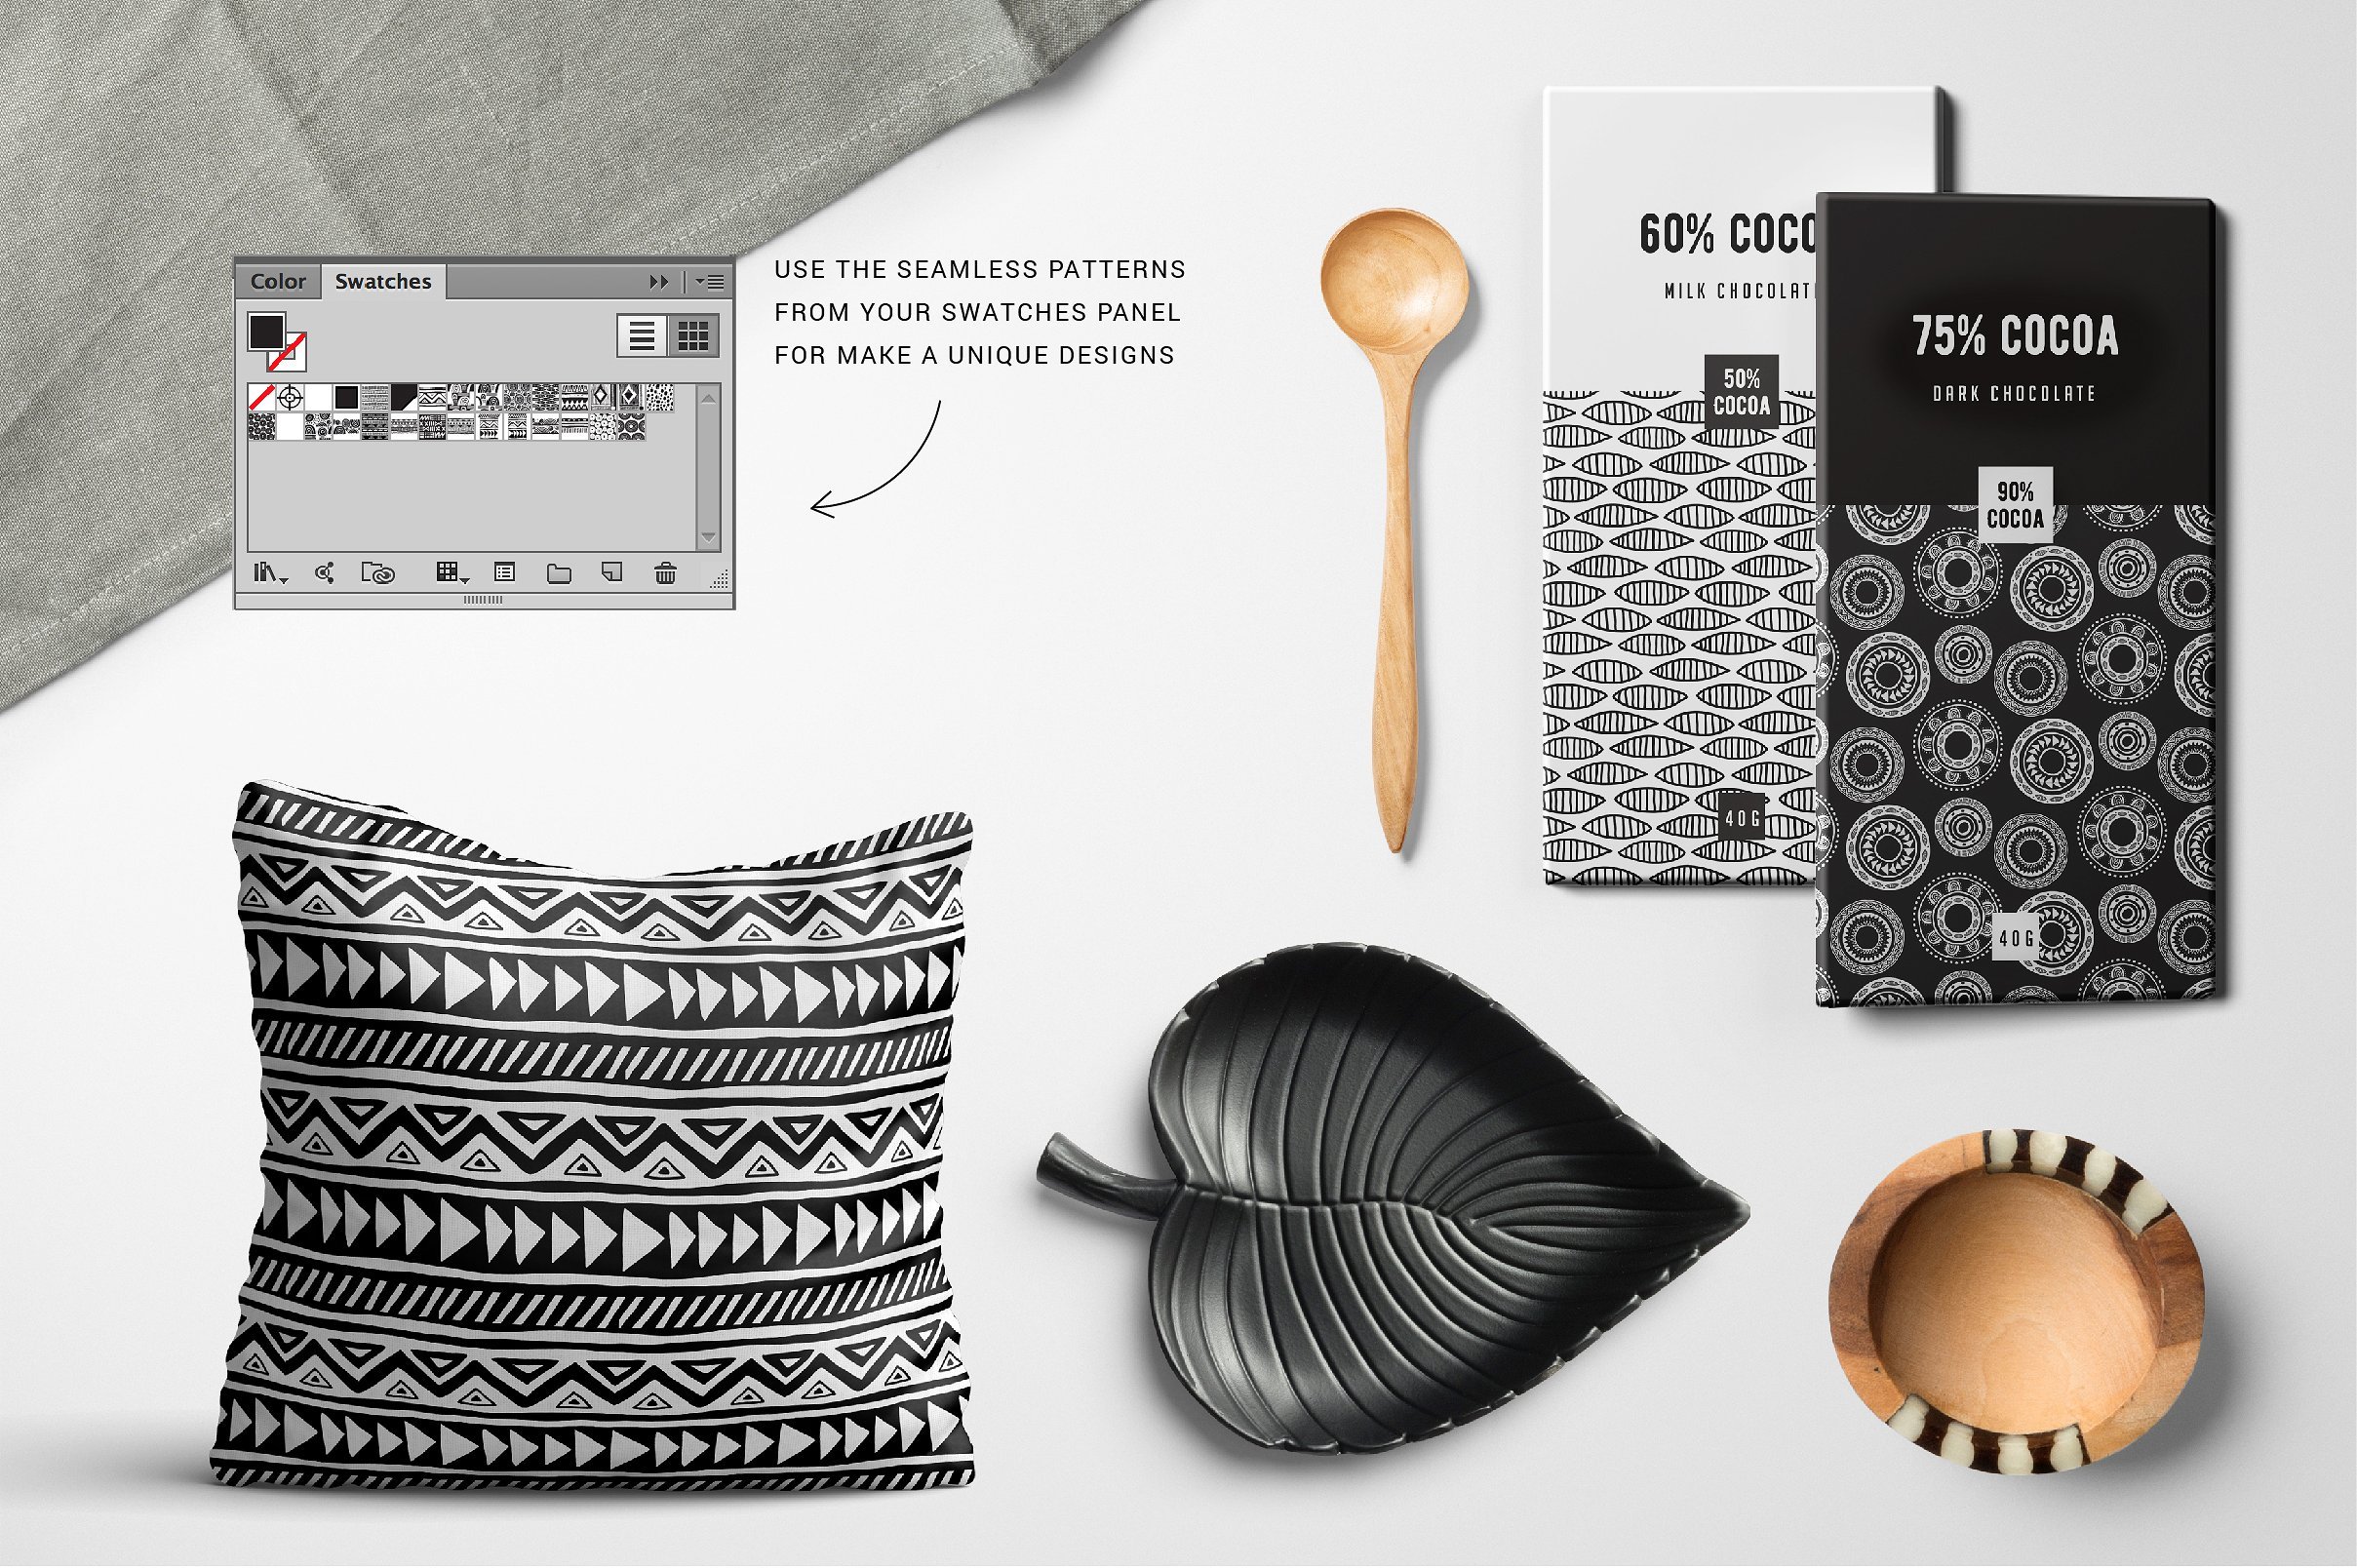 The Expansive Textures And Patterns Collection